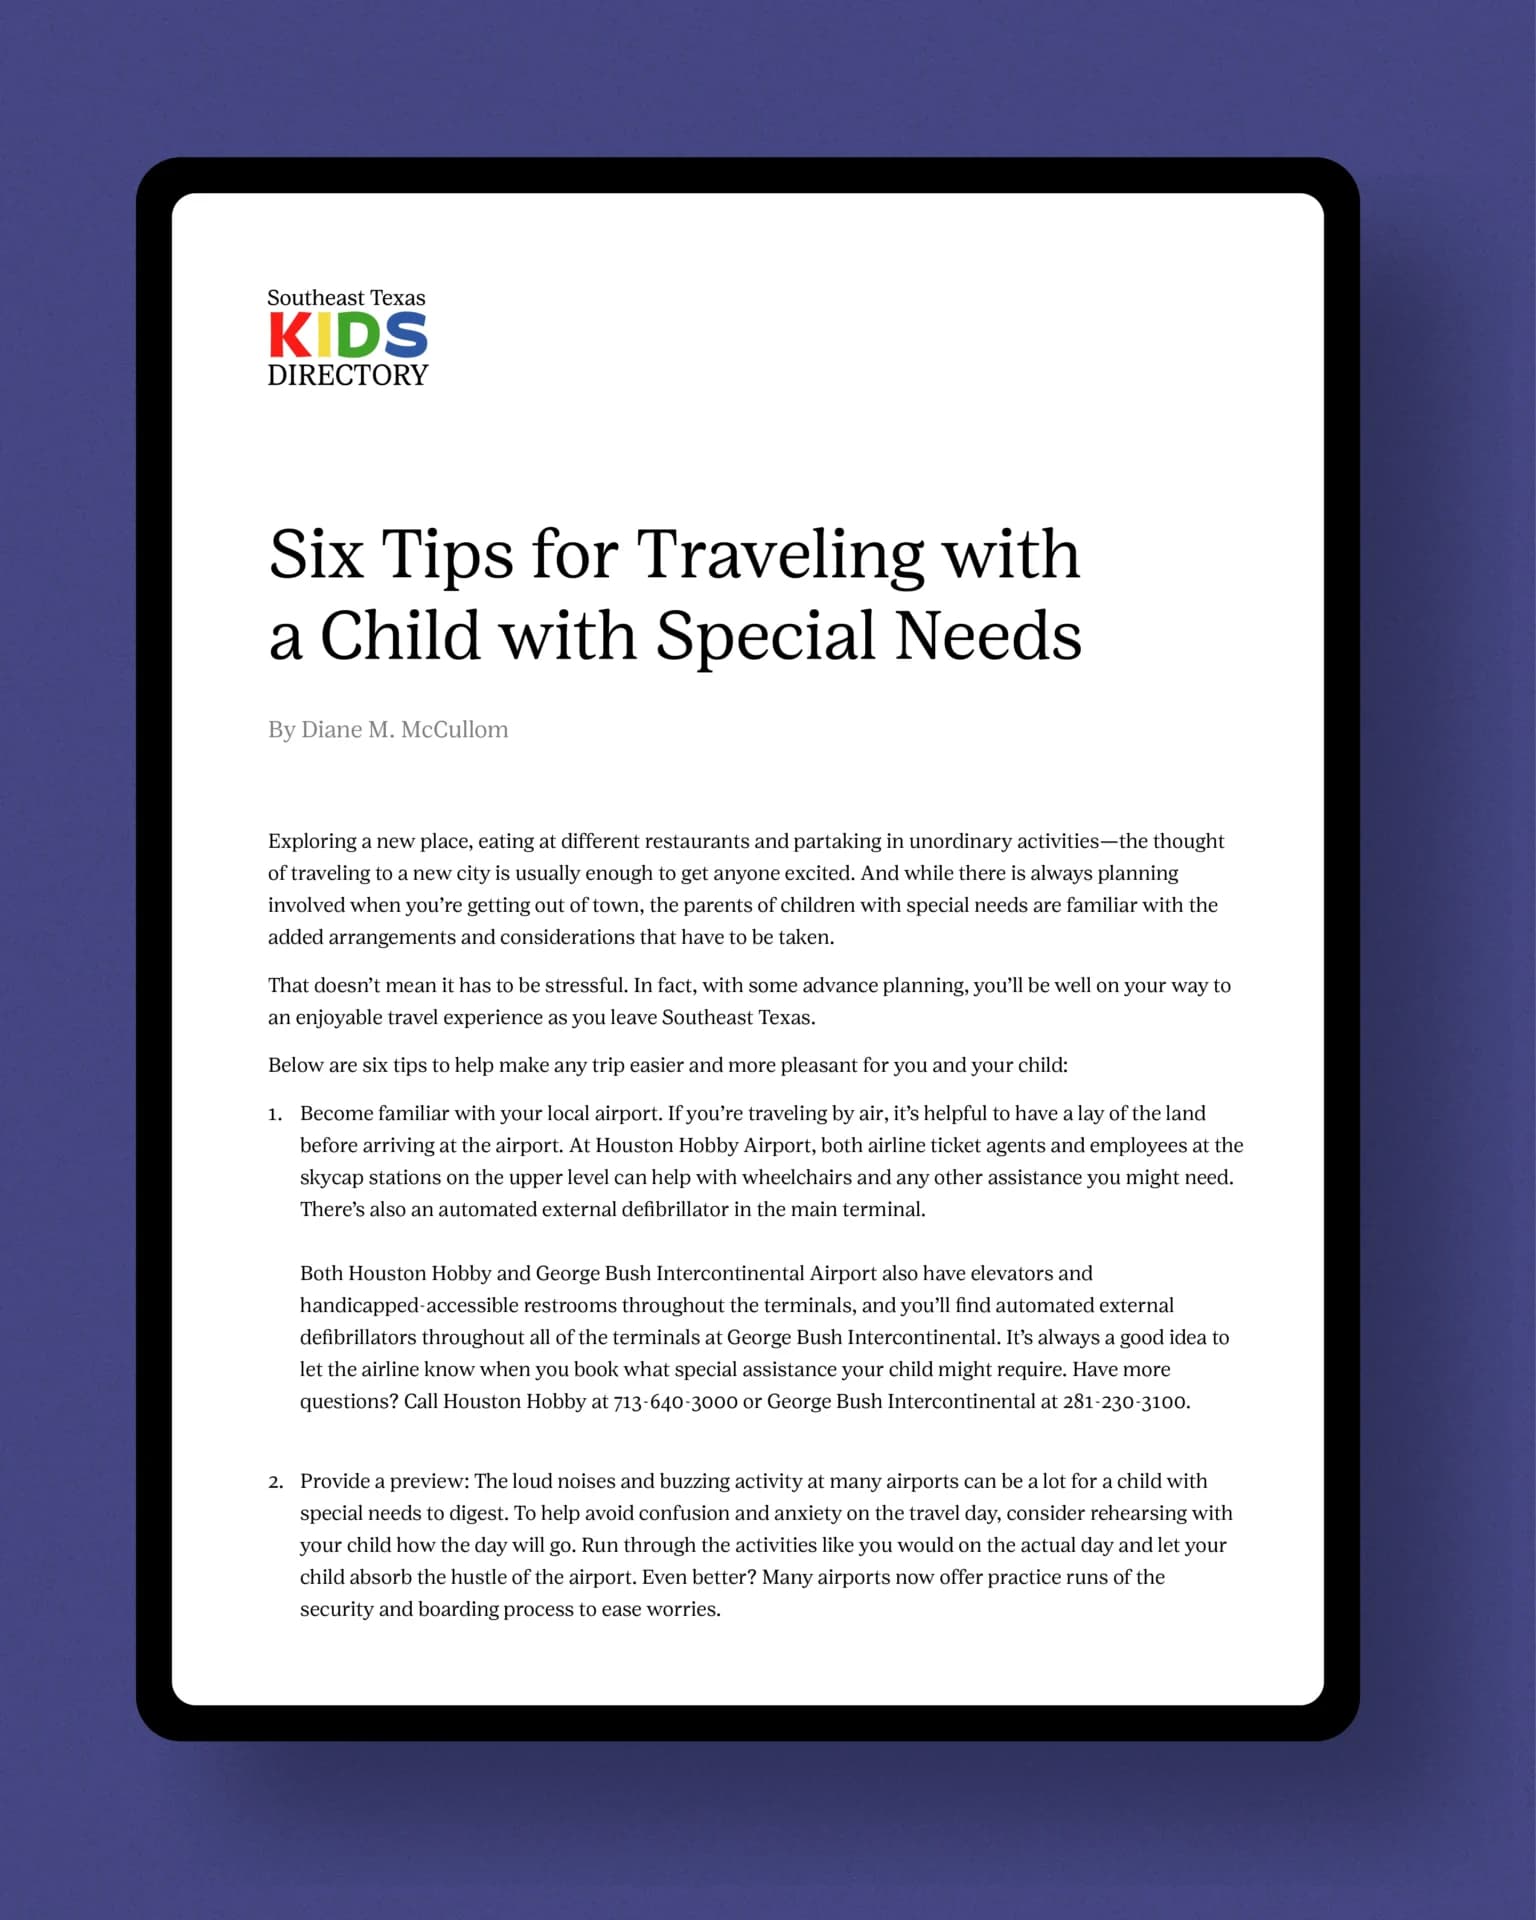 A tablet displaying six tips for traveling with a child with special needs